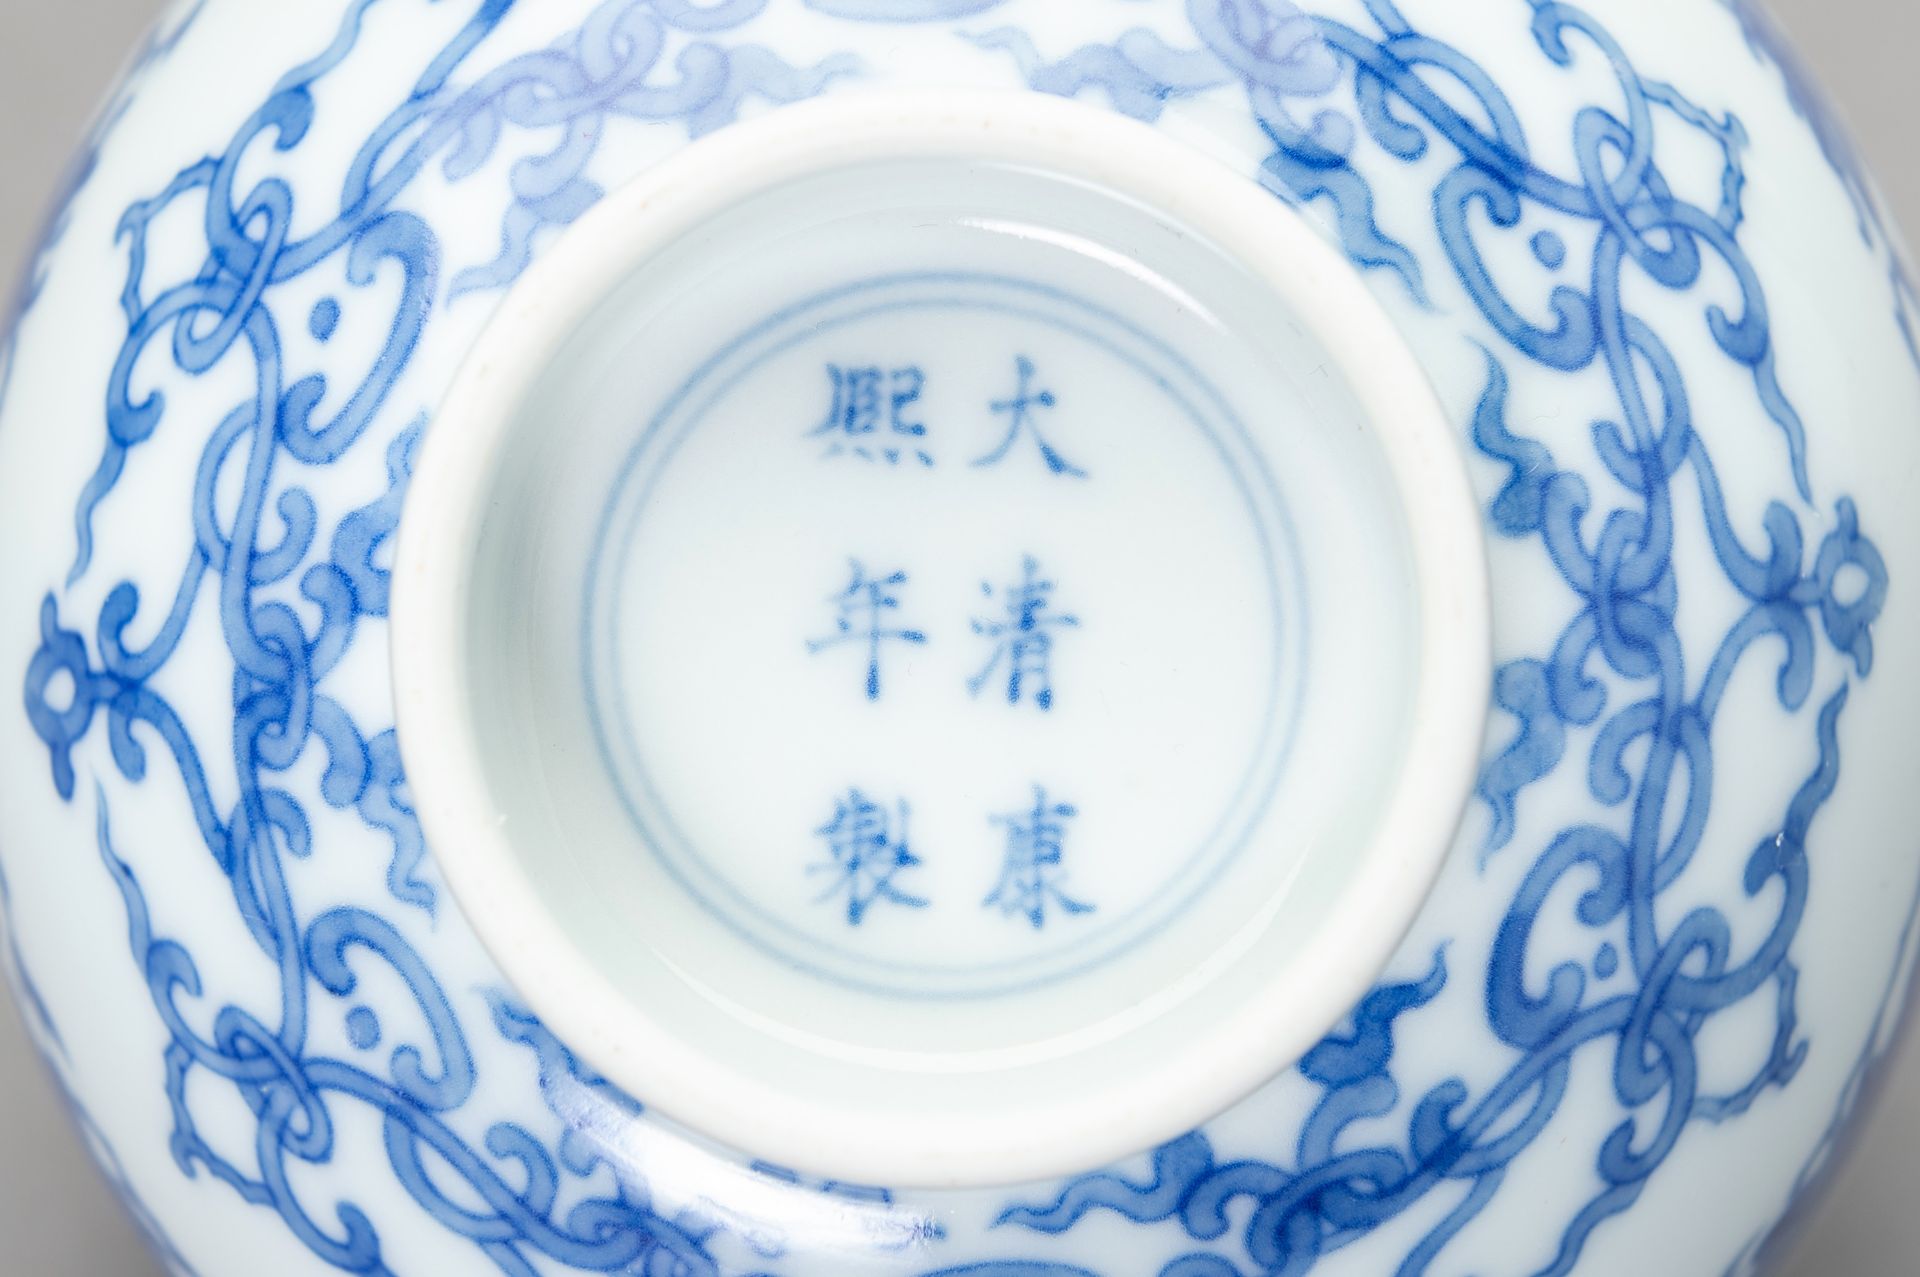 A BLUE AND WHITE KANGXI REVIVAL BOWL, LATE QING TO REPUBLIC - Image 9 of 11